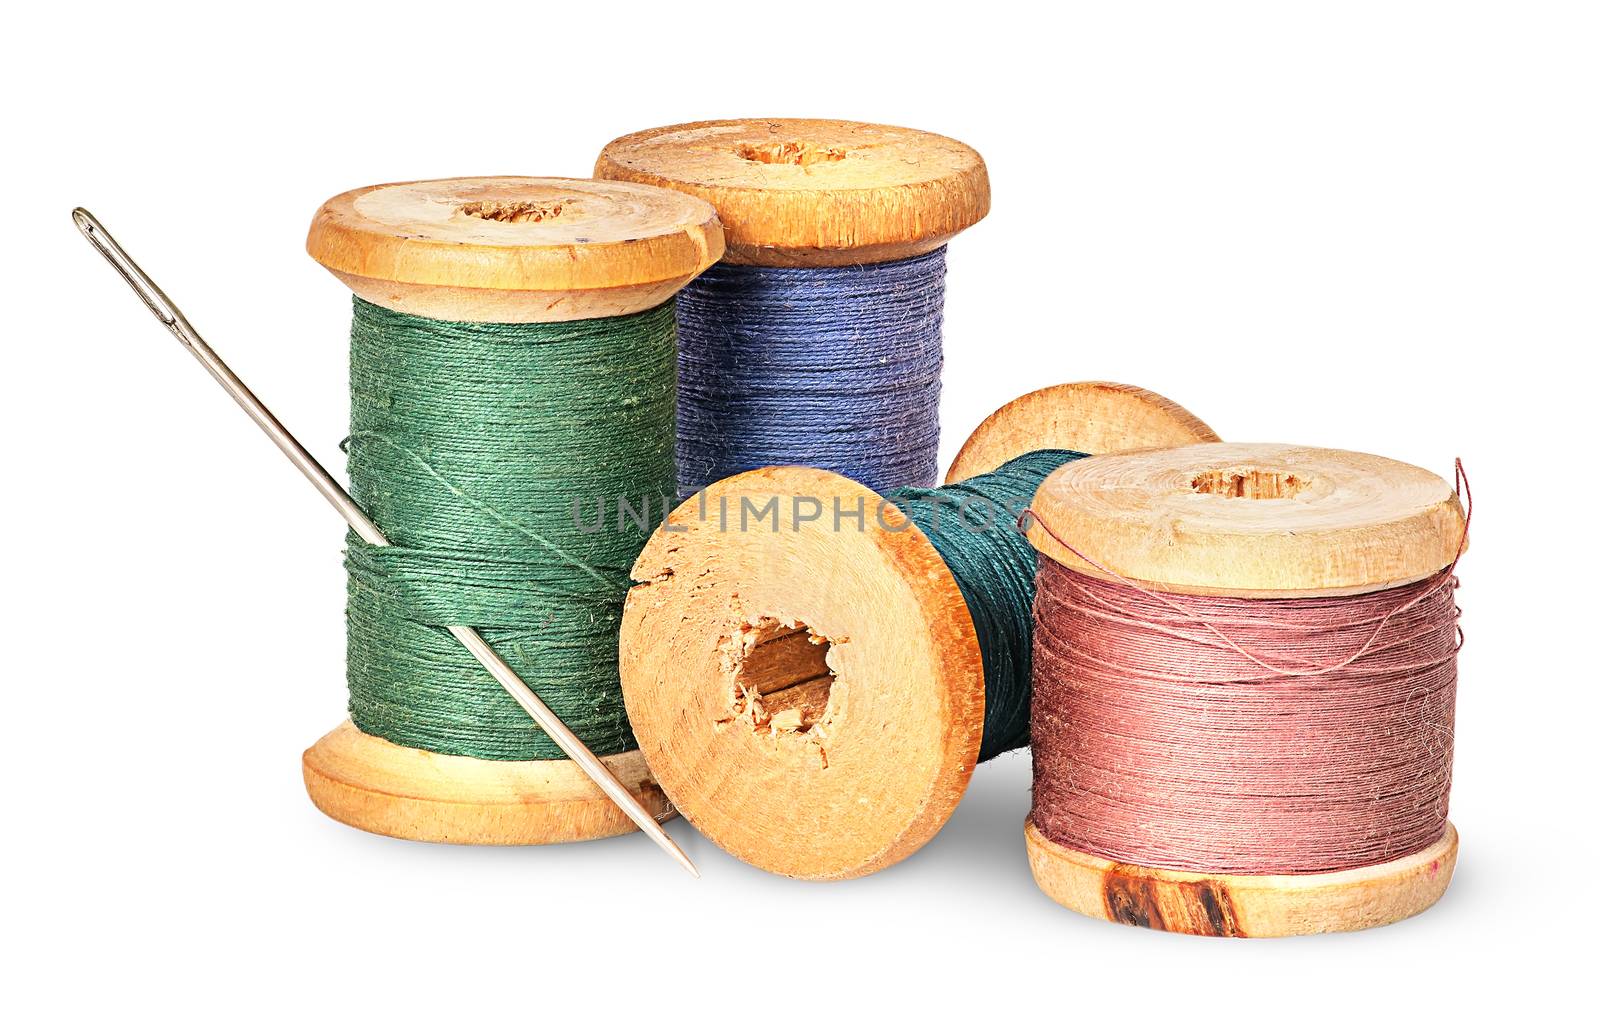 Needle and multicolored thread on wooden spool by Cipariss